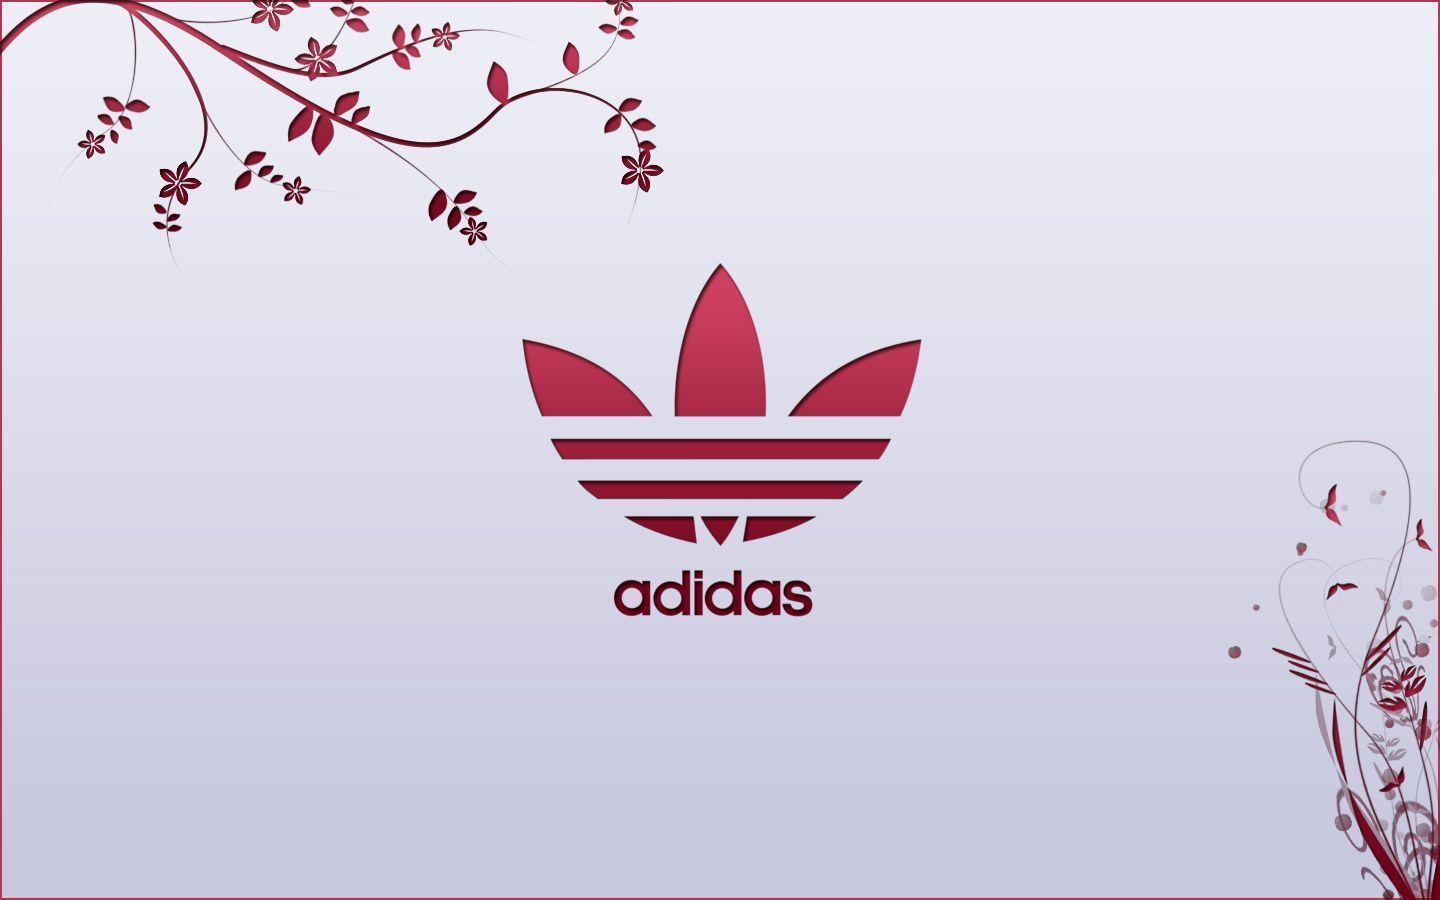 Cool wallpaper Adidas, Poster, Design | FREE Best backgrounds